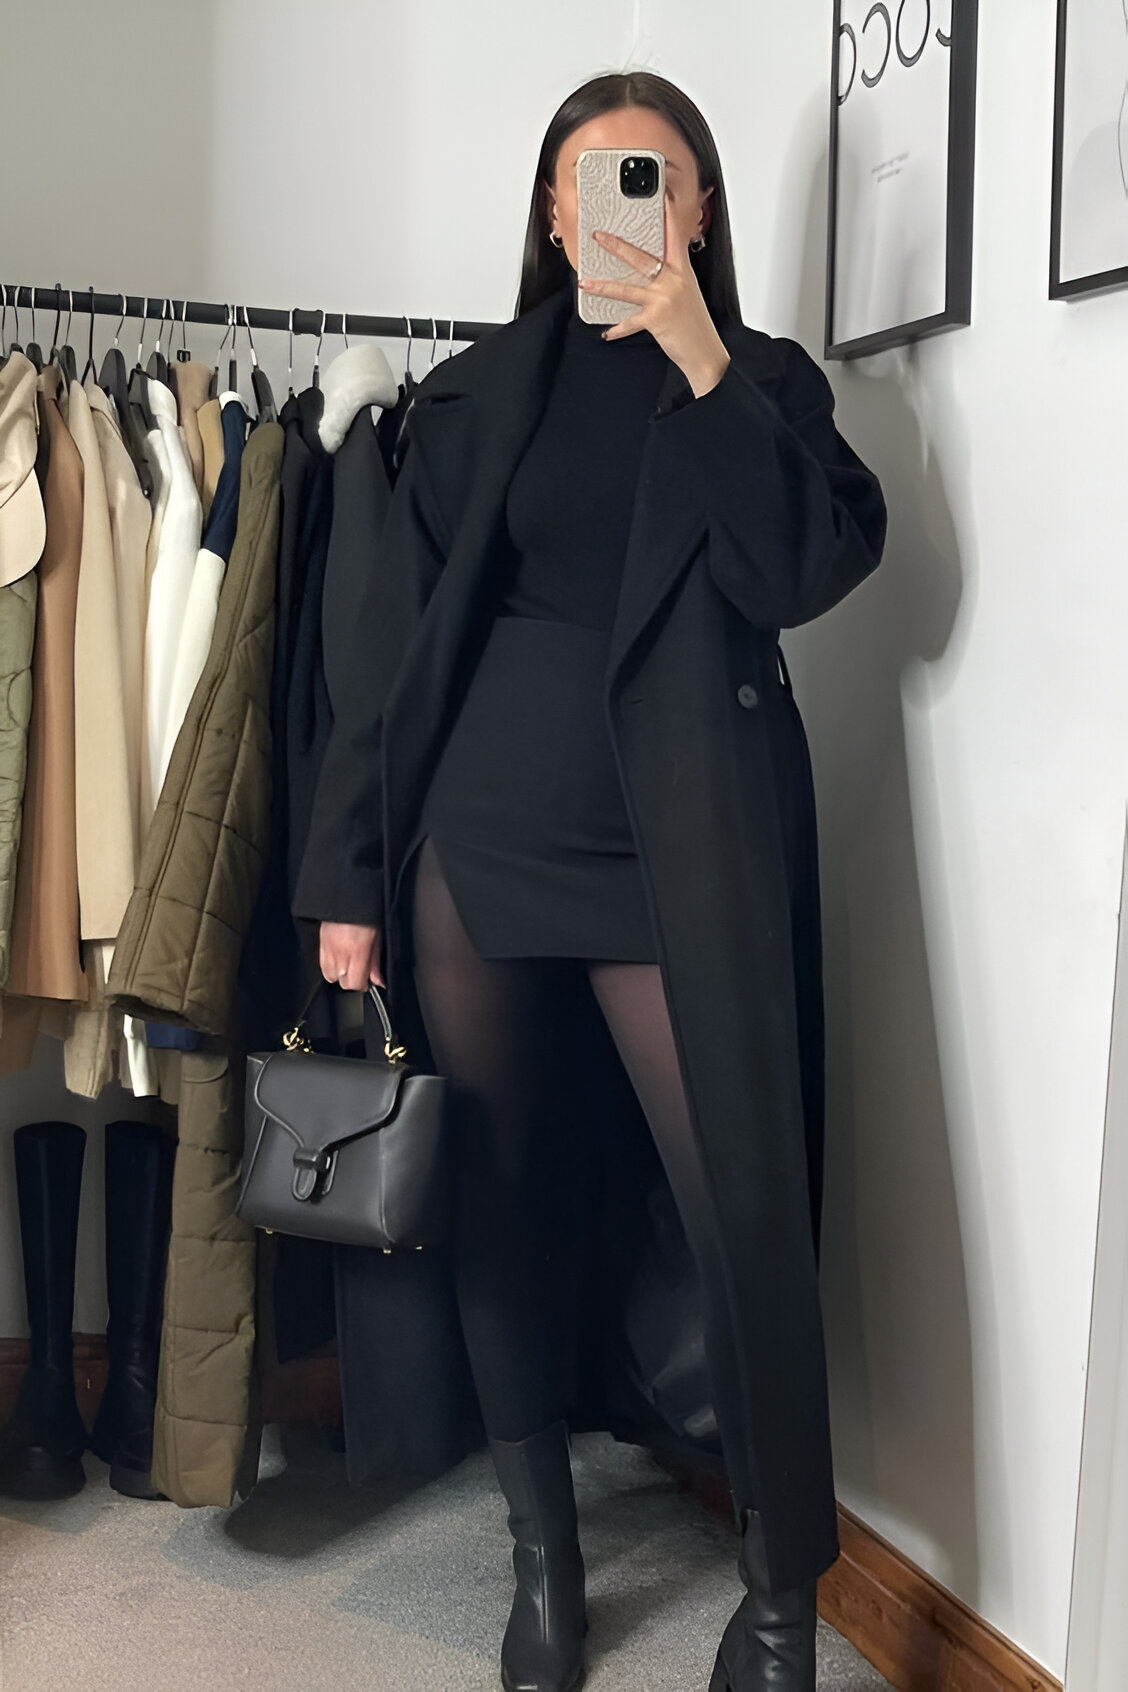 All-Black Winter Outfits For Dates